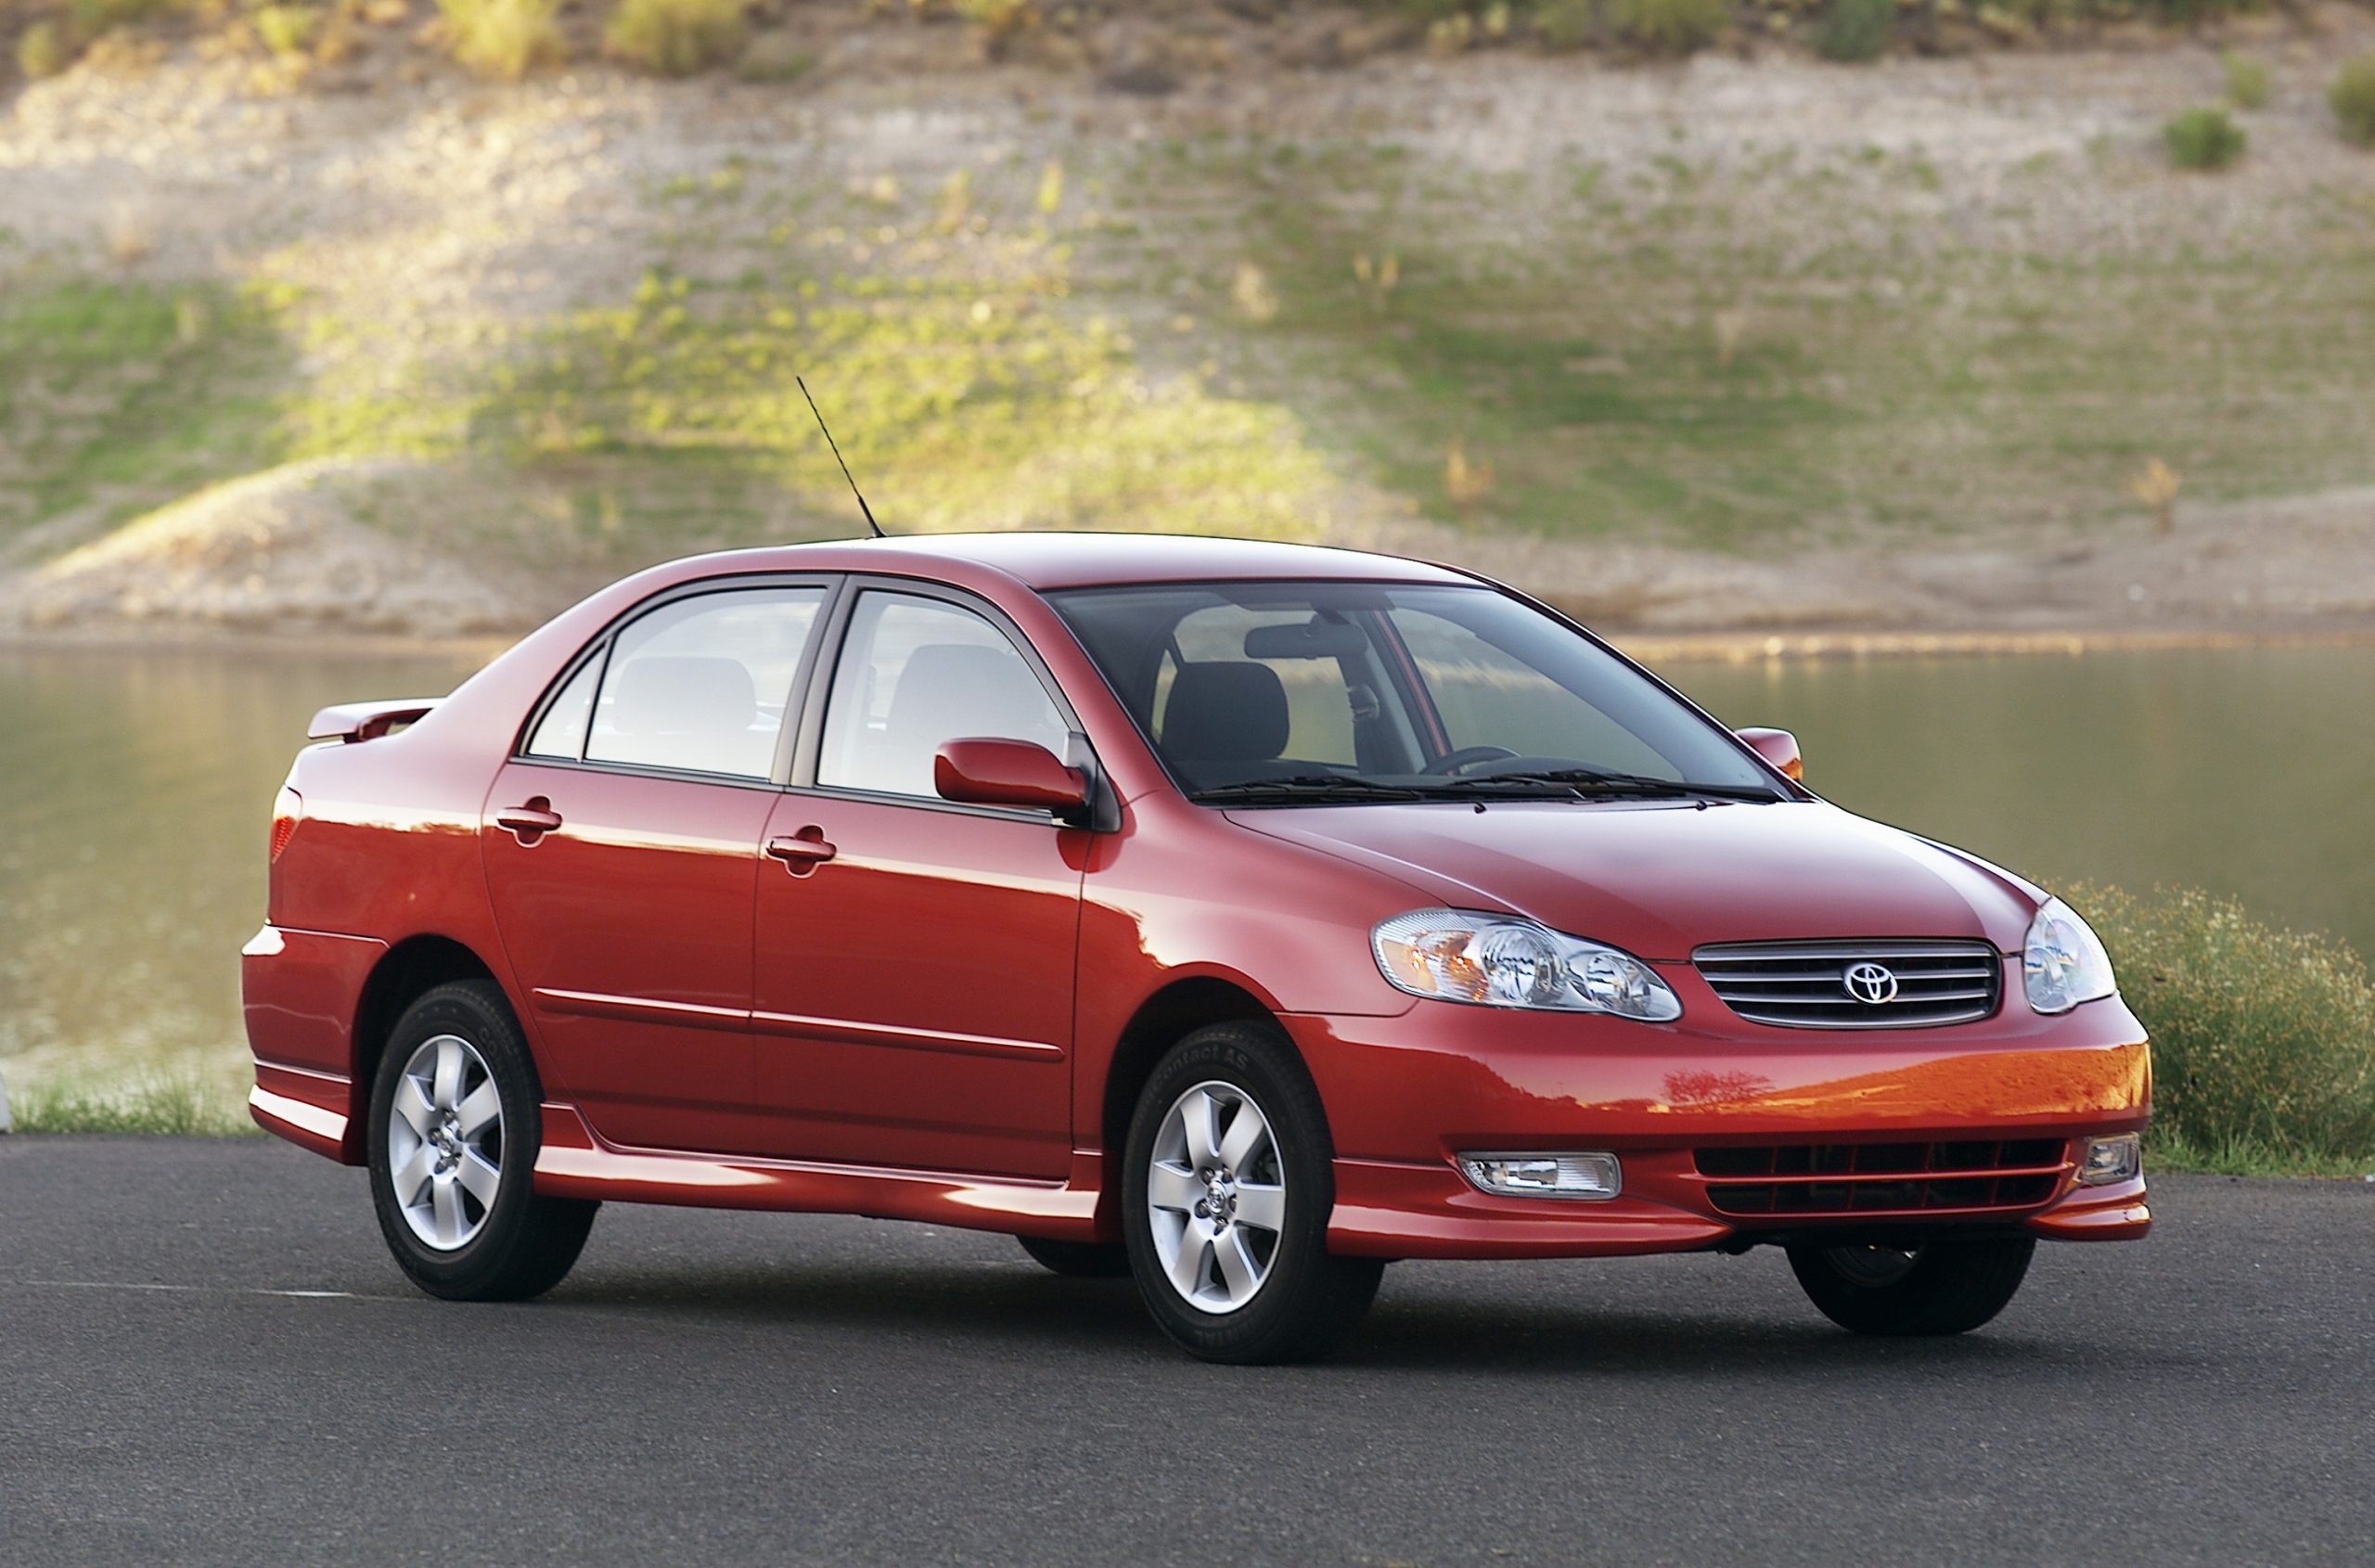 A red '05 Toyota Corolla shot from the front 3/4 during the golden hour